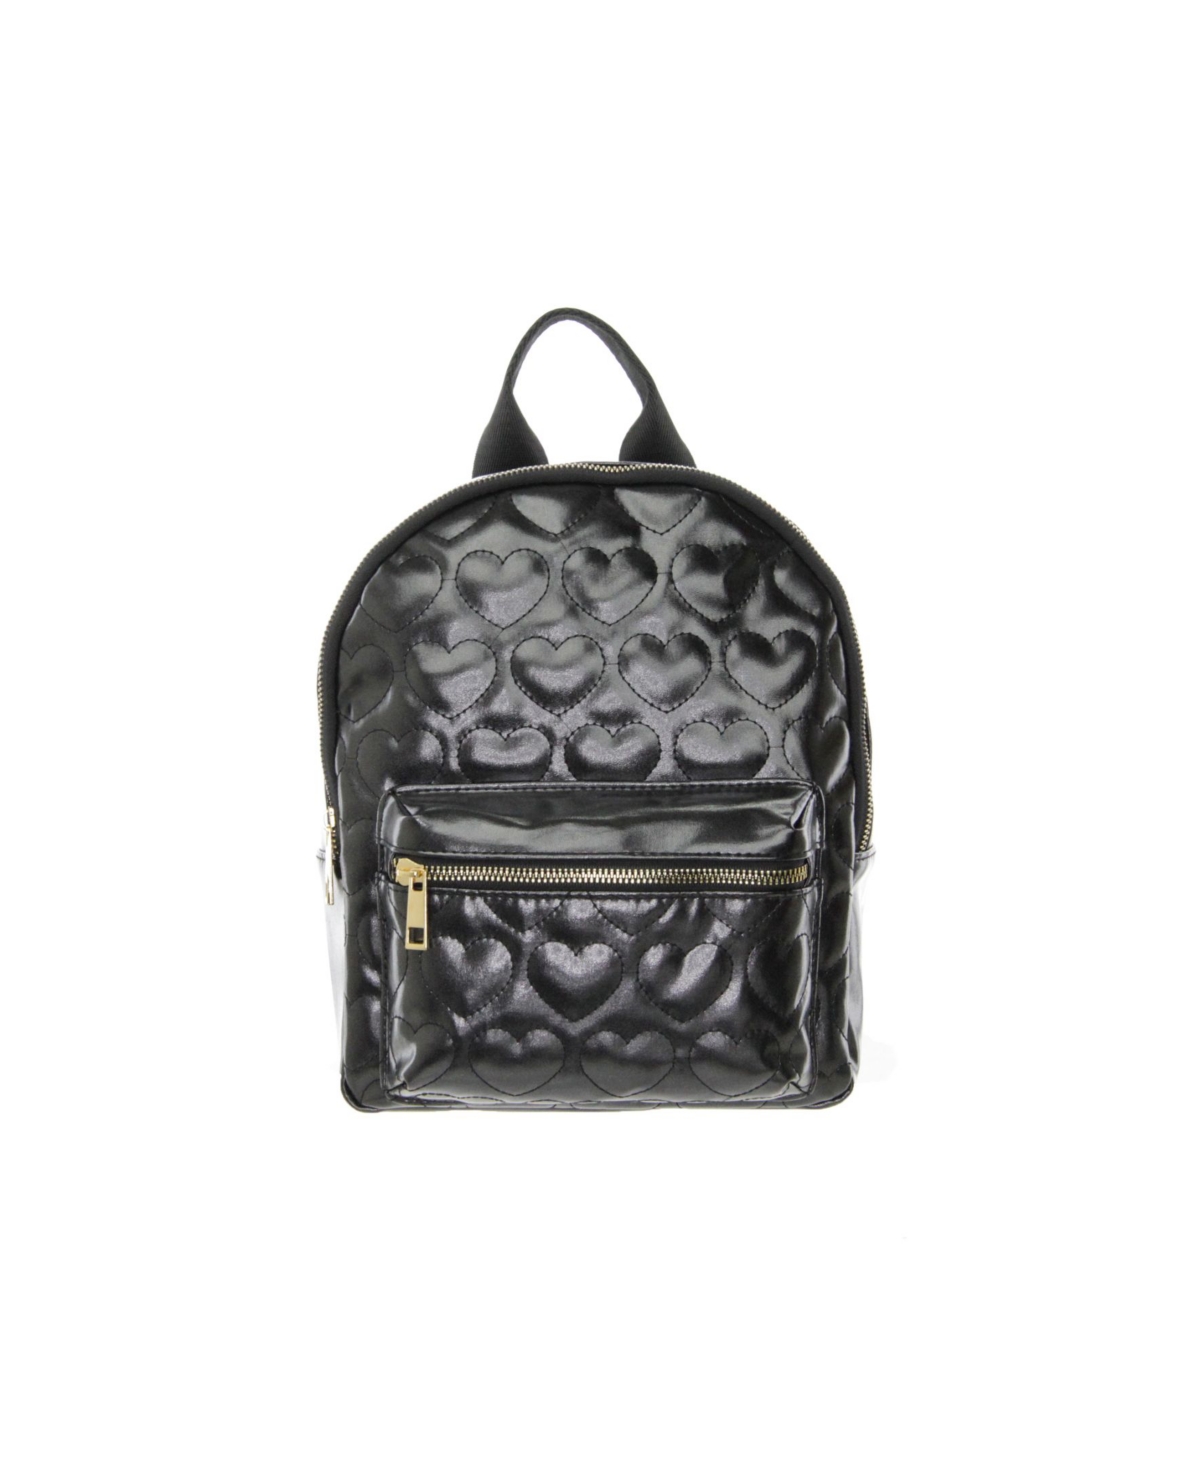 Women's Brianna Small Backpack - Black